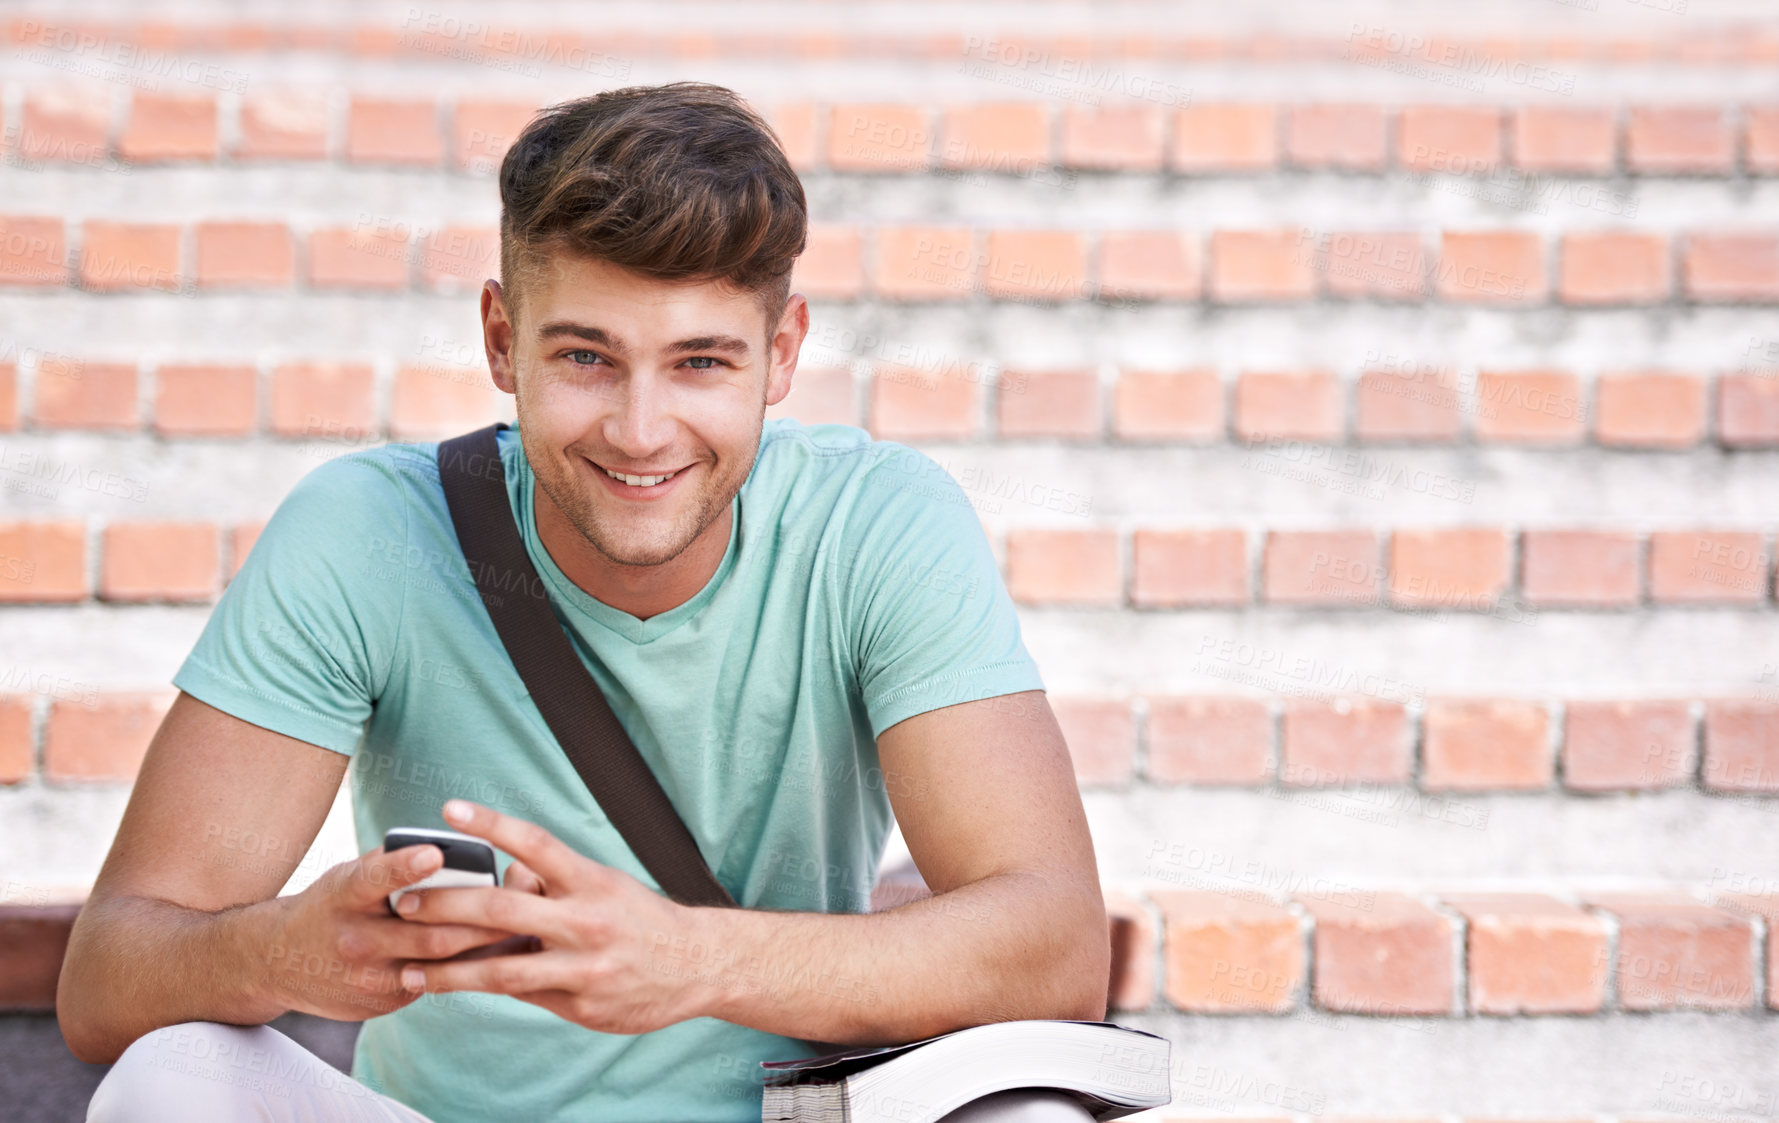 Buy stock photo A young student sitting on the stairs texting